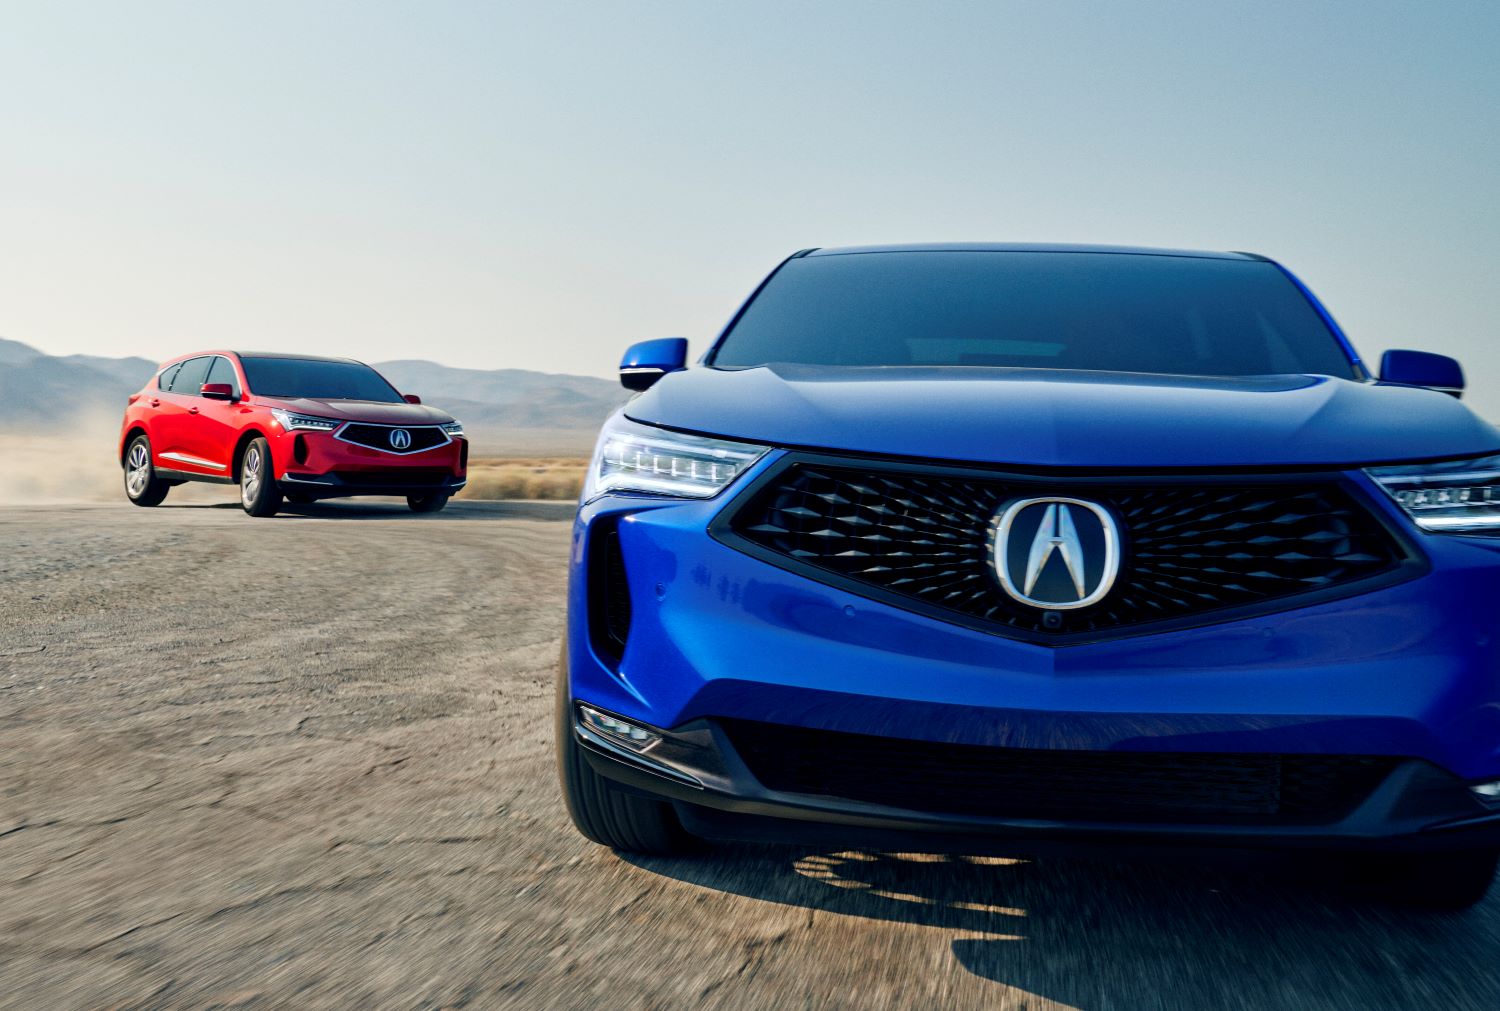  Lease a Acura in New London, CT 